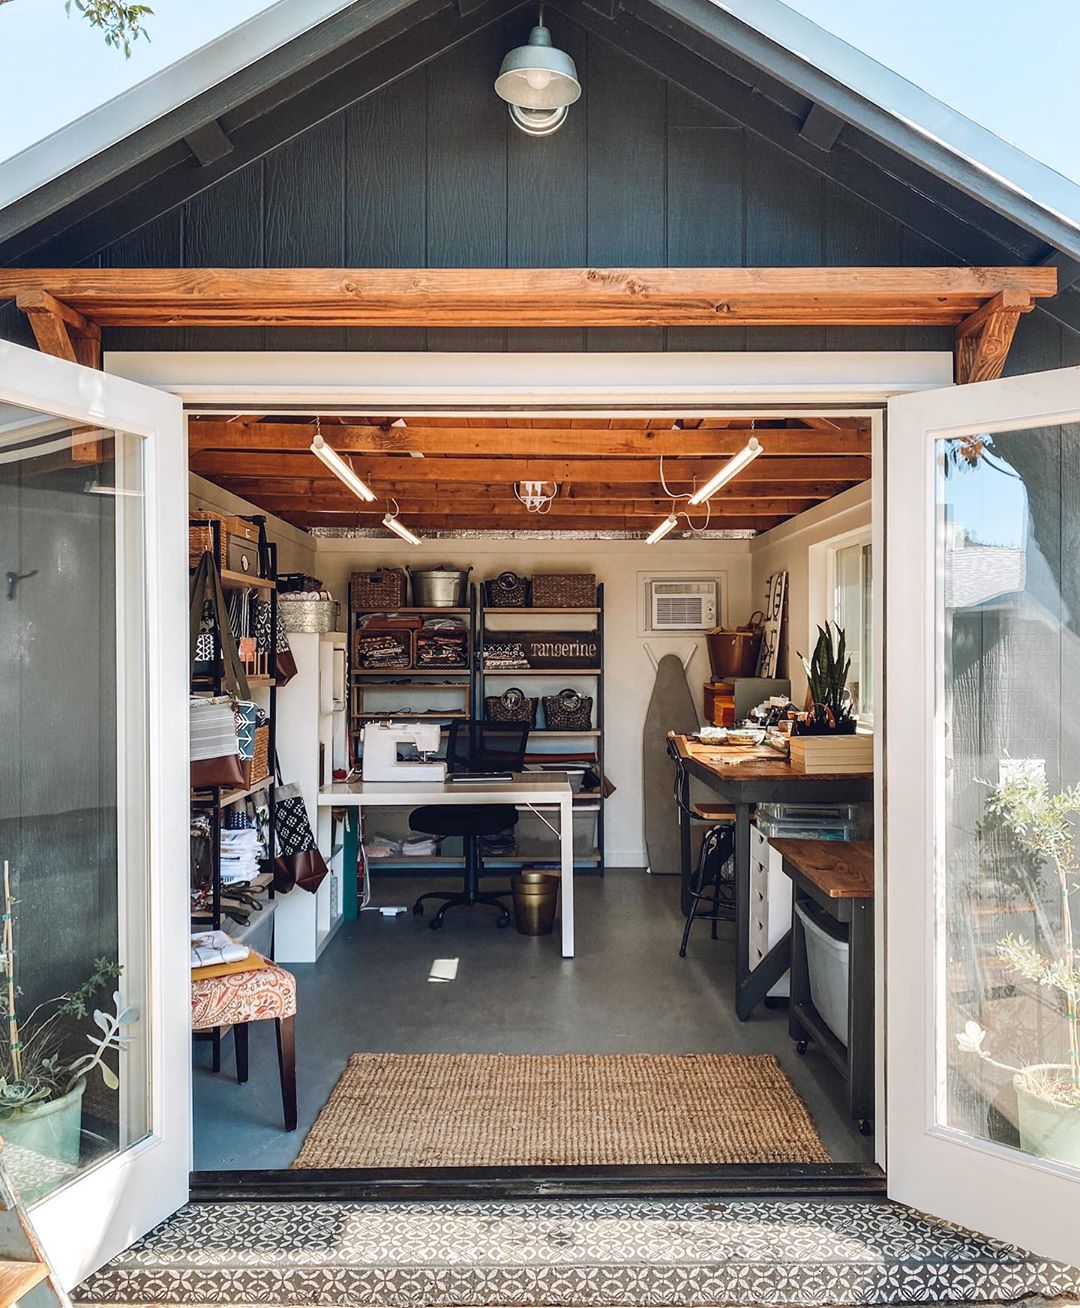 She Shed Filled with a Crafting Area and Table. Photo by Instagram user @sweettangerinechico